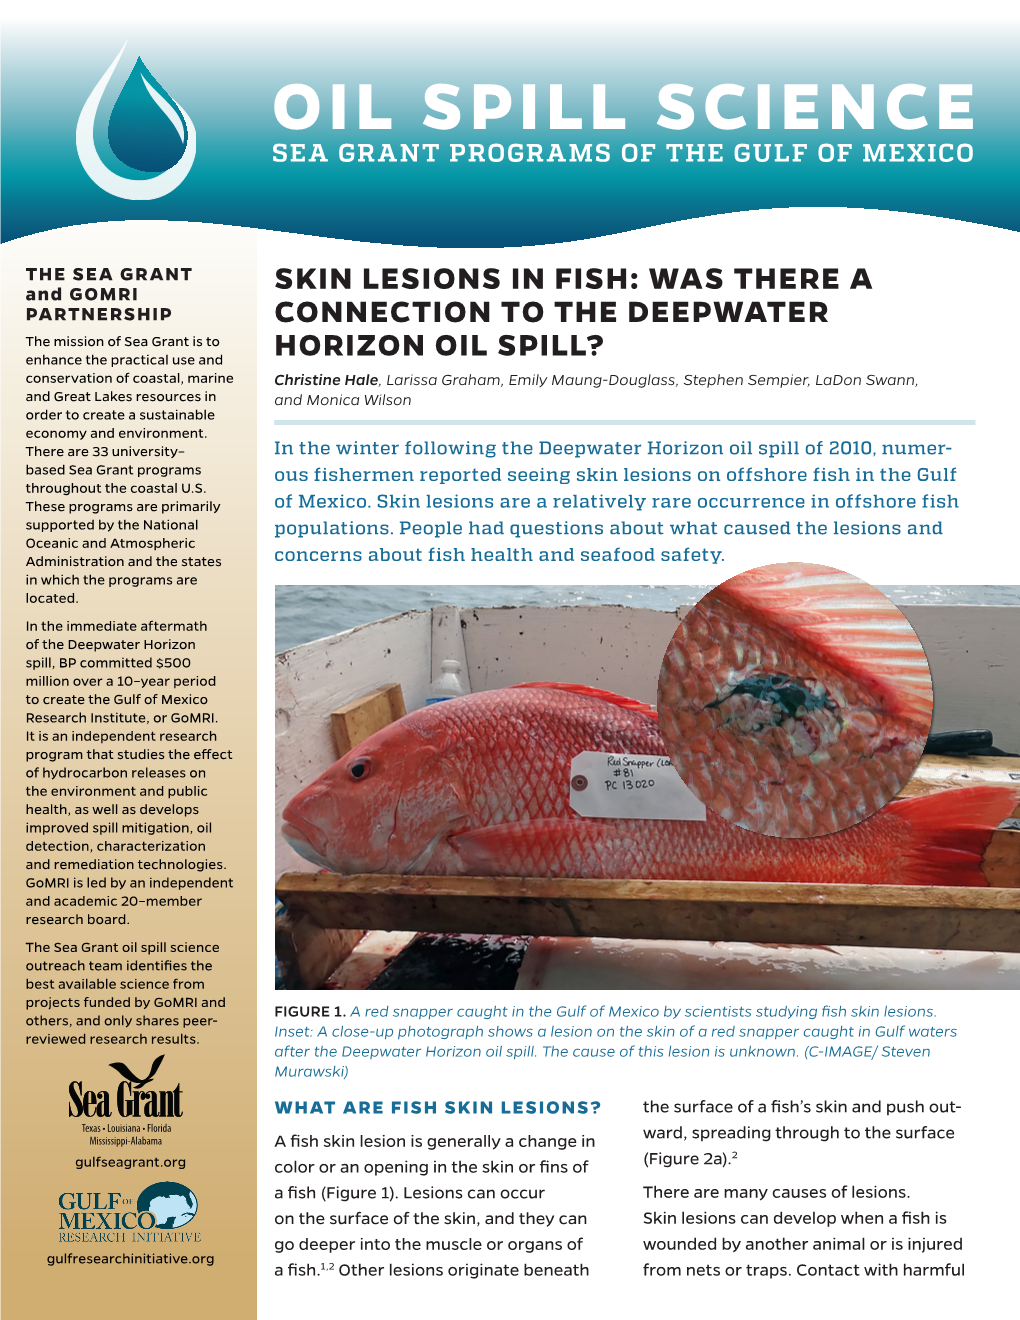 Skin Lesions in Fish: Was There a Connection to The